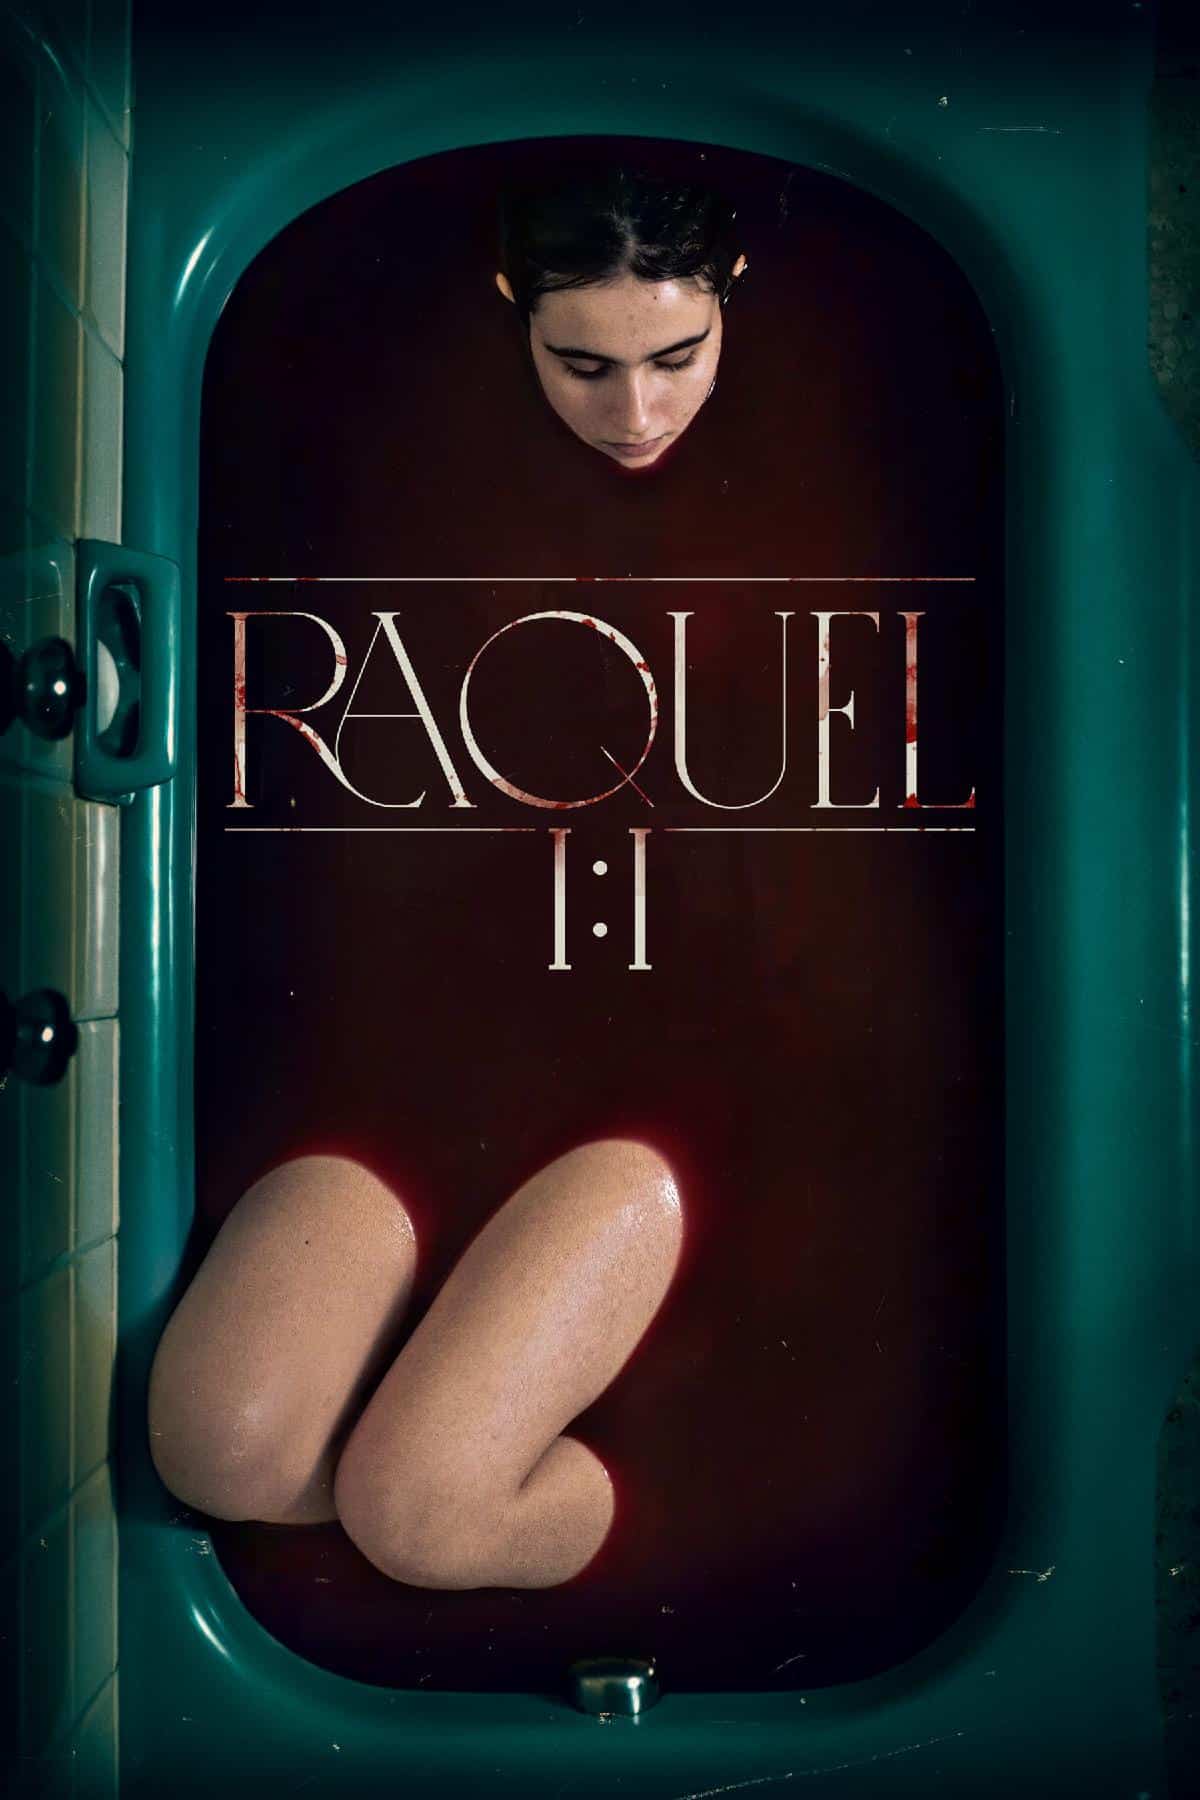 Discover the Compelling Story of Raquel in the SXSW Religious Thriller: RAQUEL 1:1 - Available on VOD and Digital this February! 18